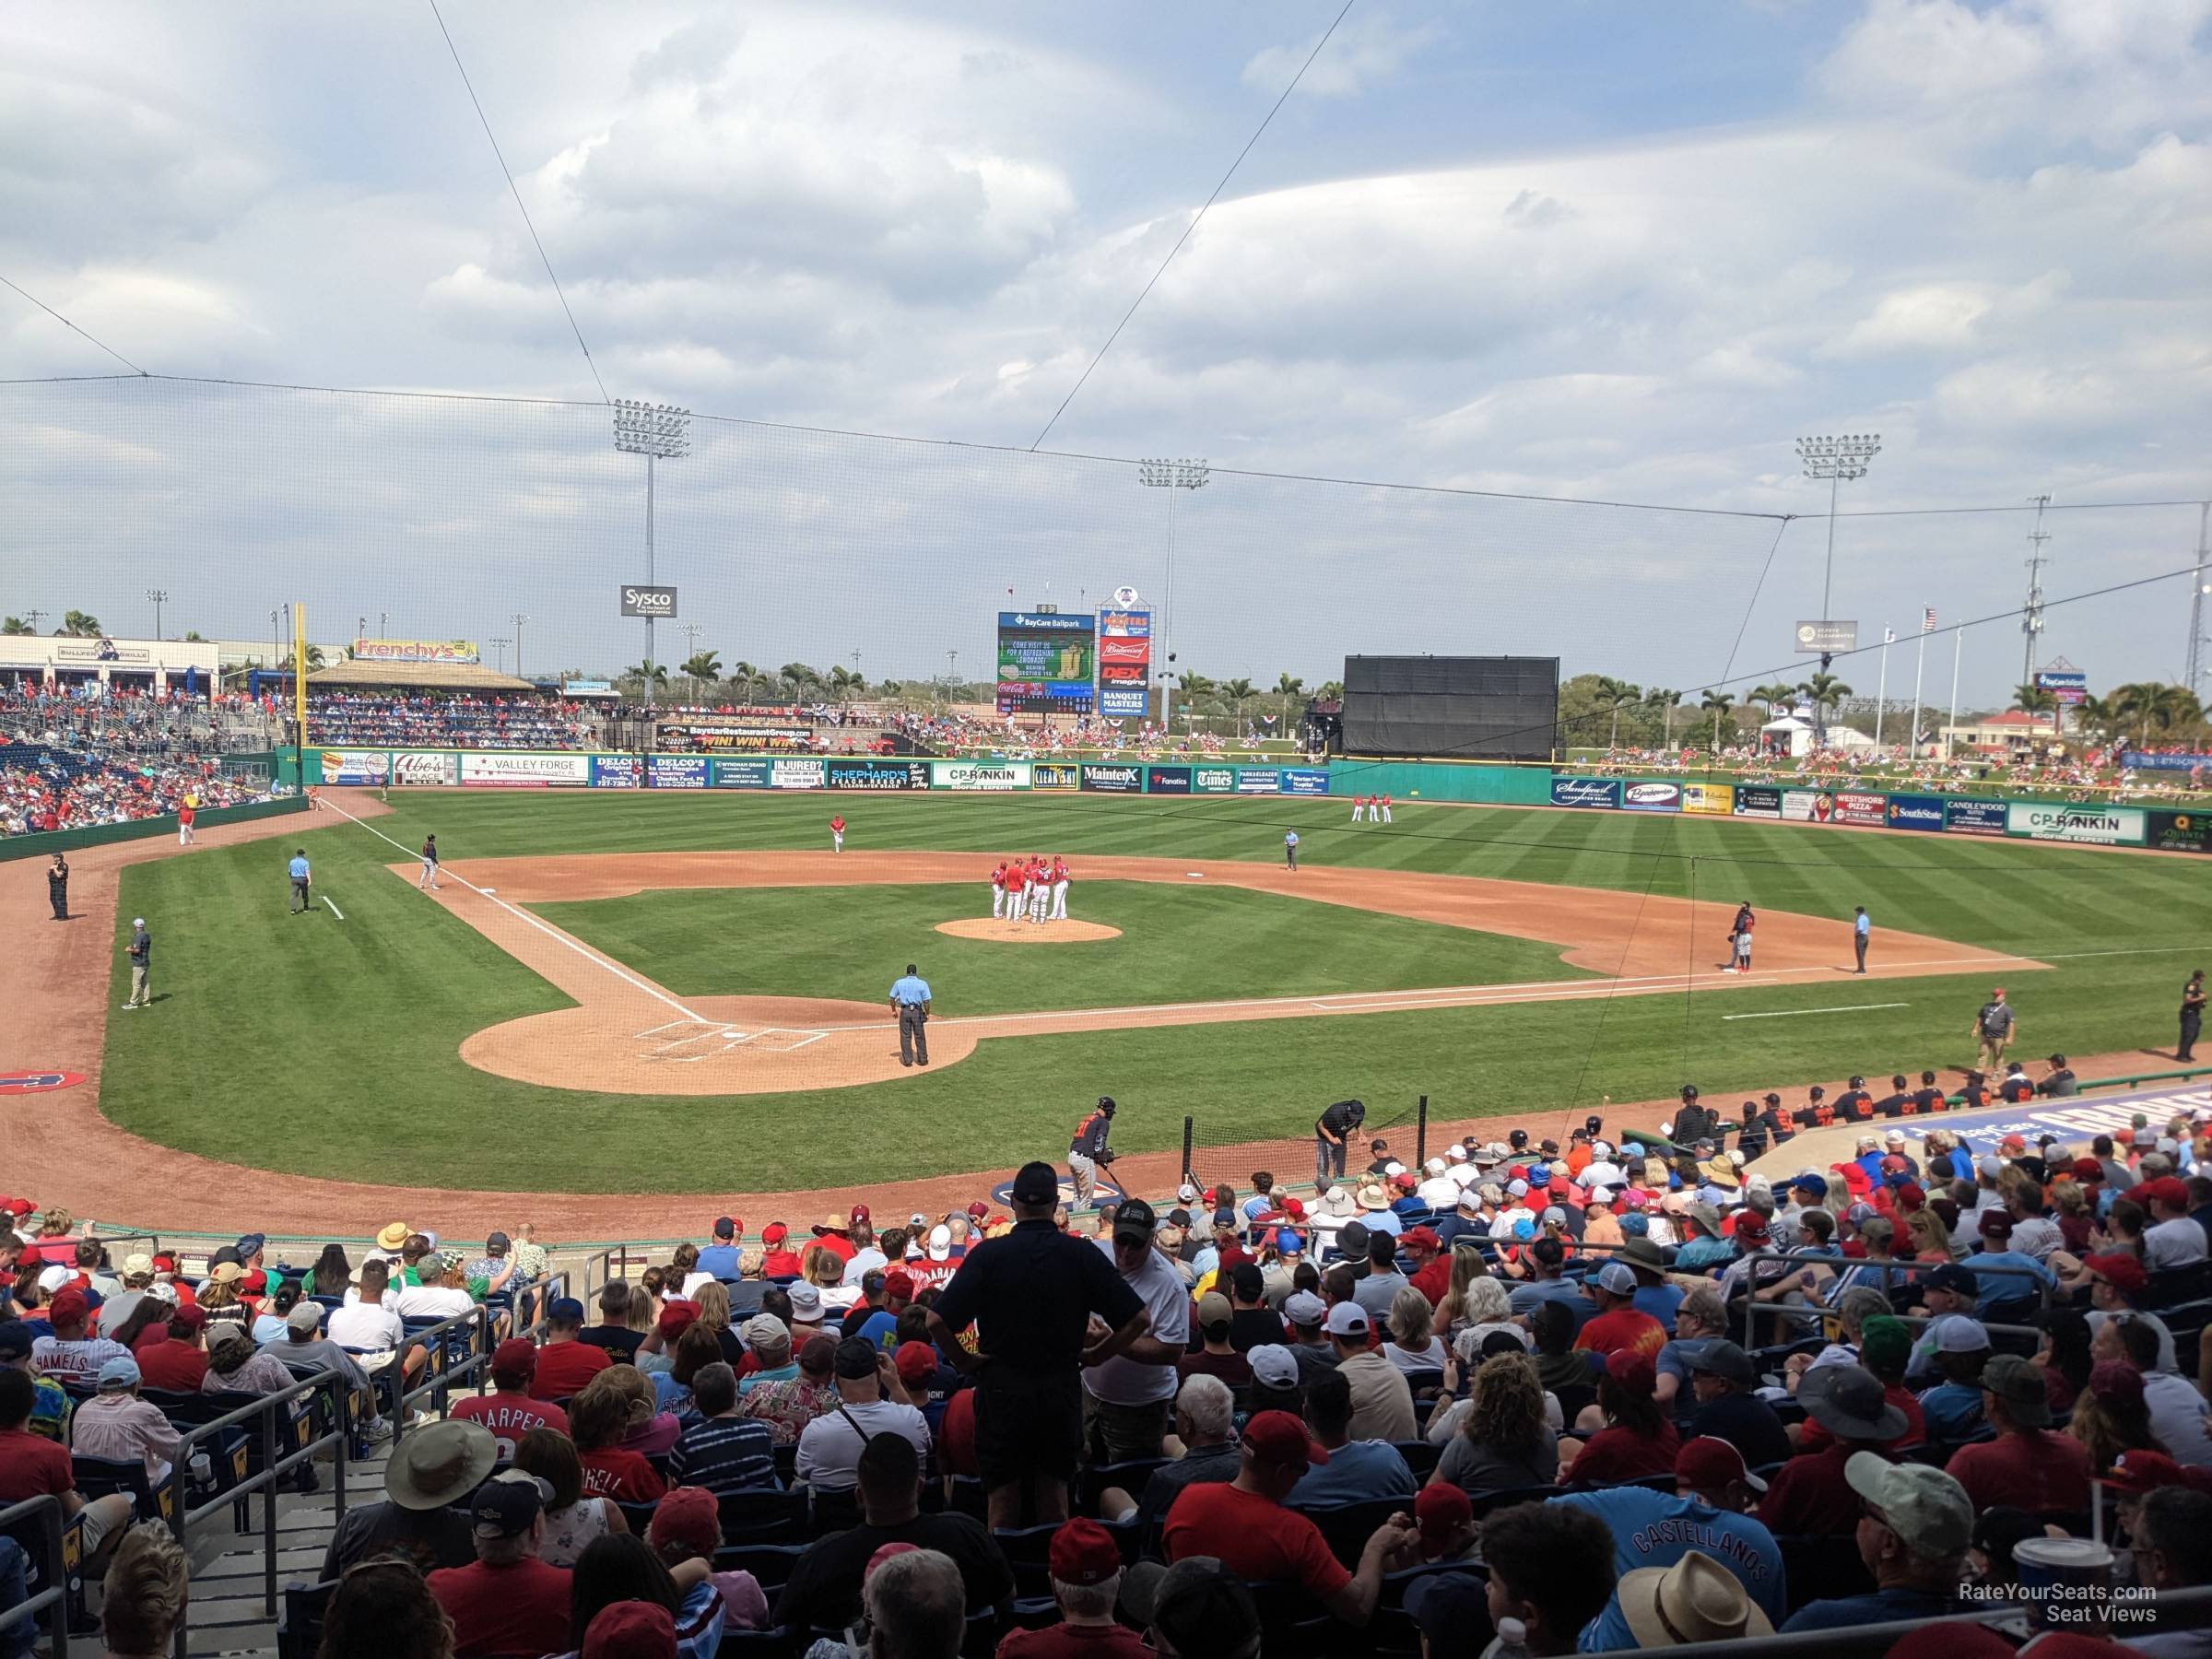 section 109, row 18 seat view  - baycare ballpark